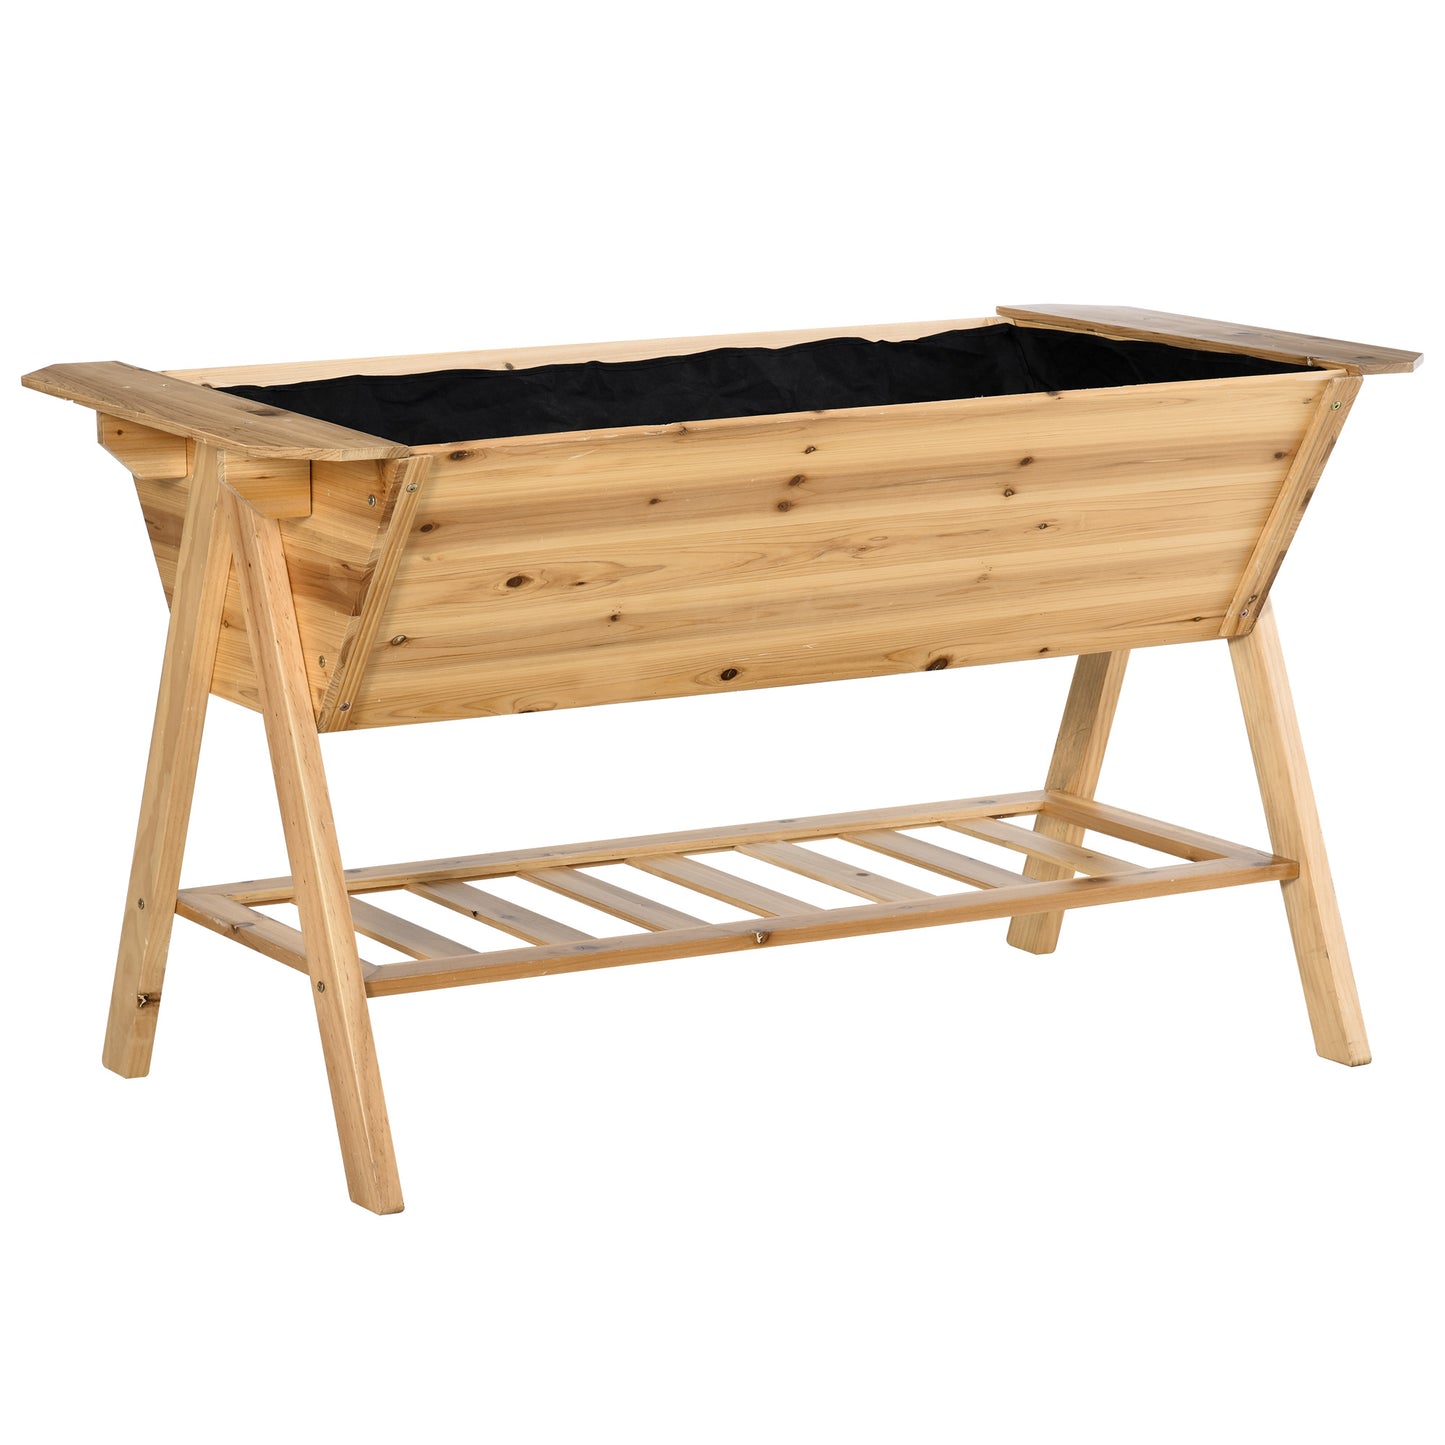 Outsunny Wooden Planter Garden Raised Bed Free Standing with Storage Shelf Plates